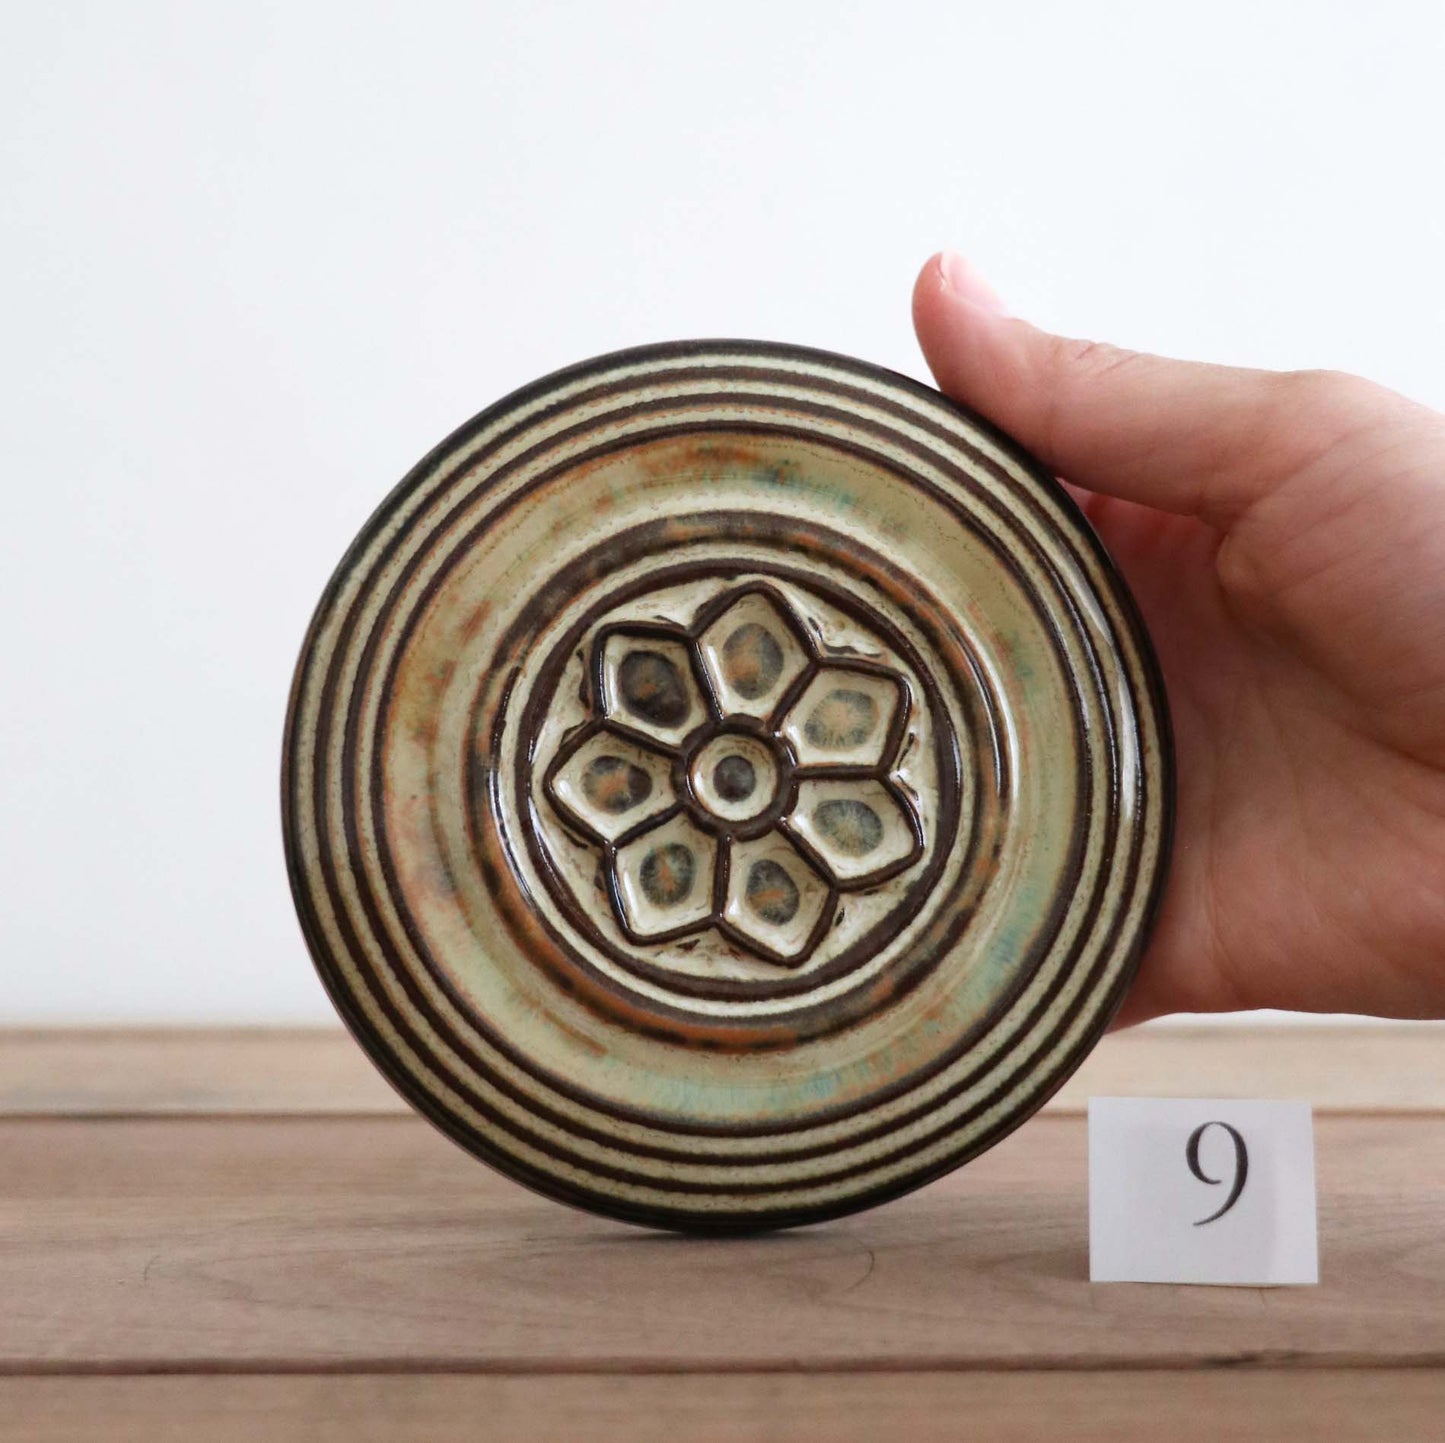 Round Rose Window Wall Tile: 9